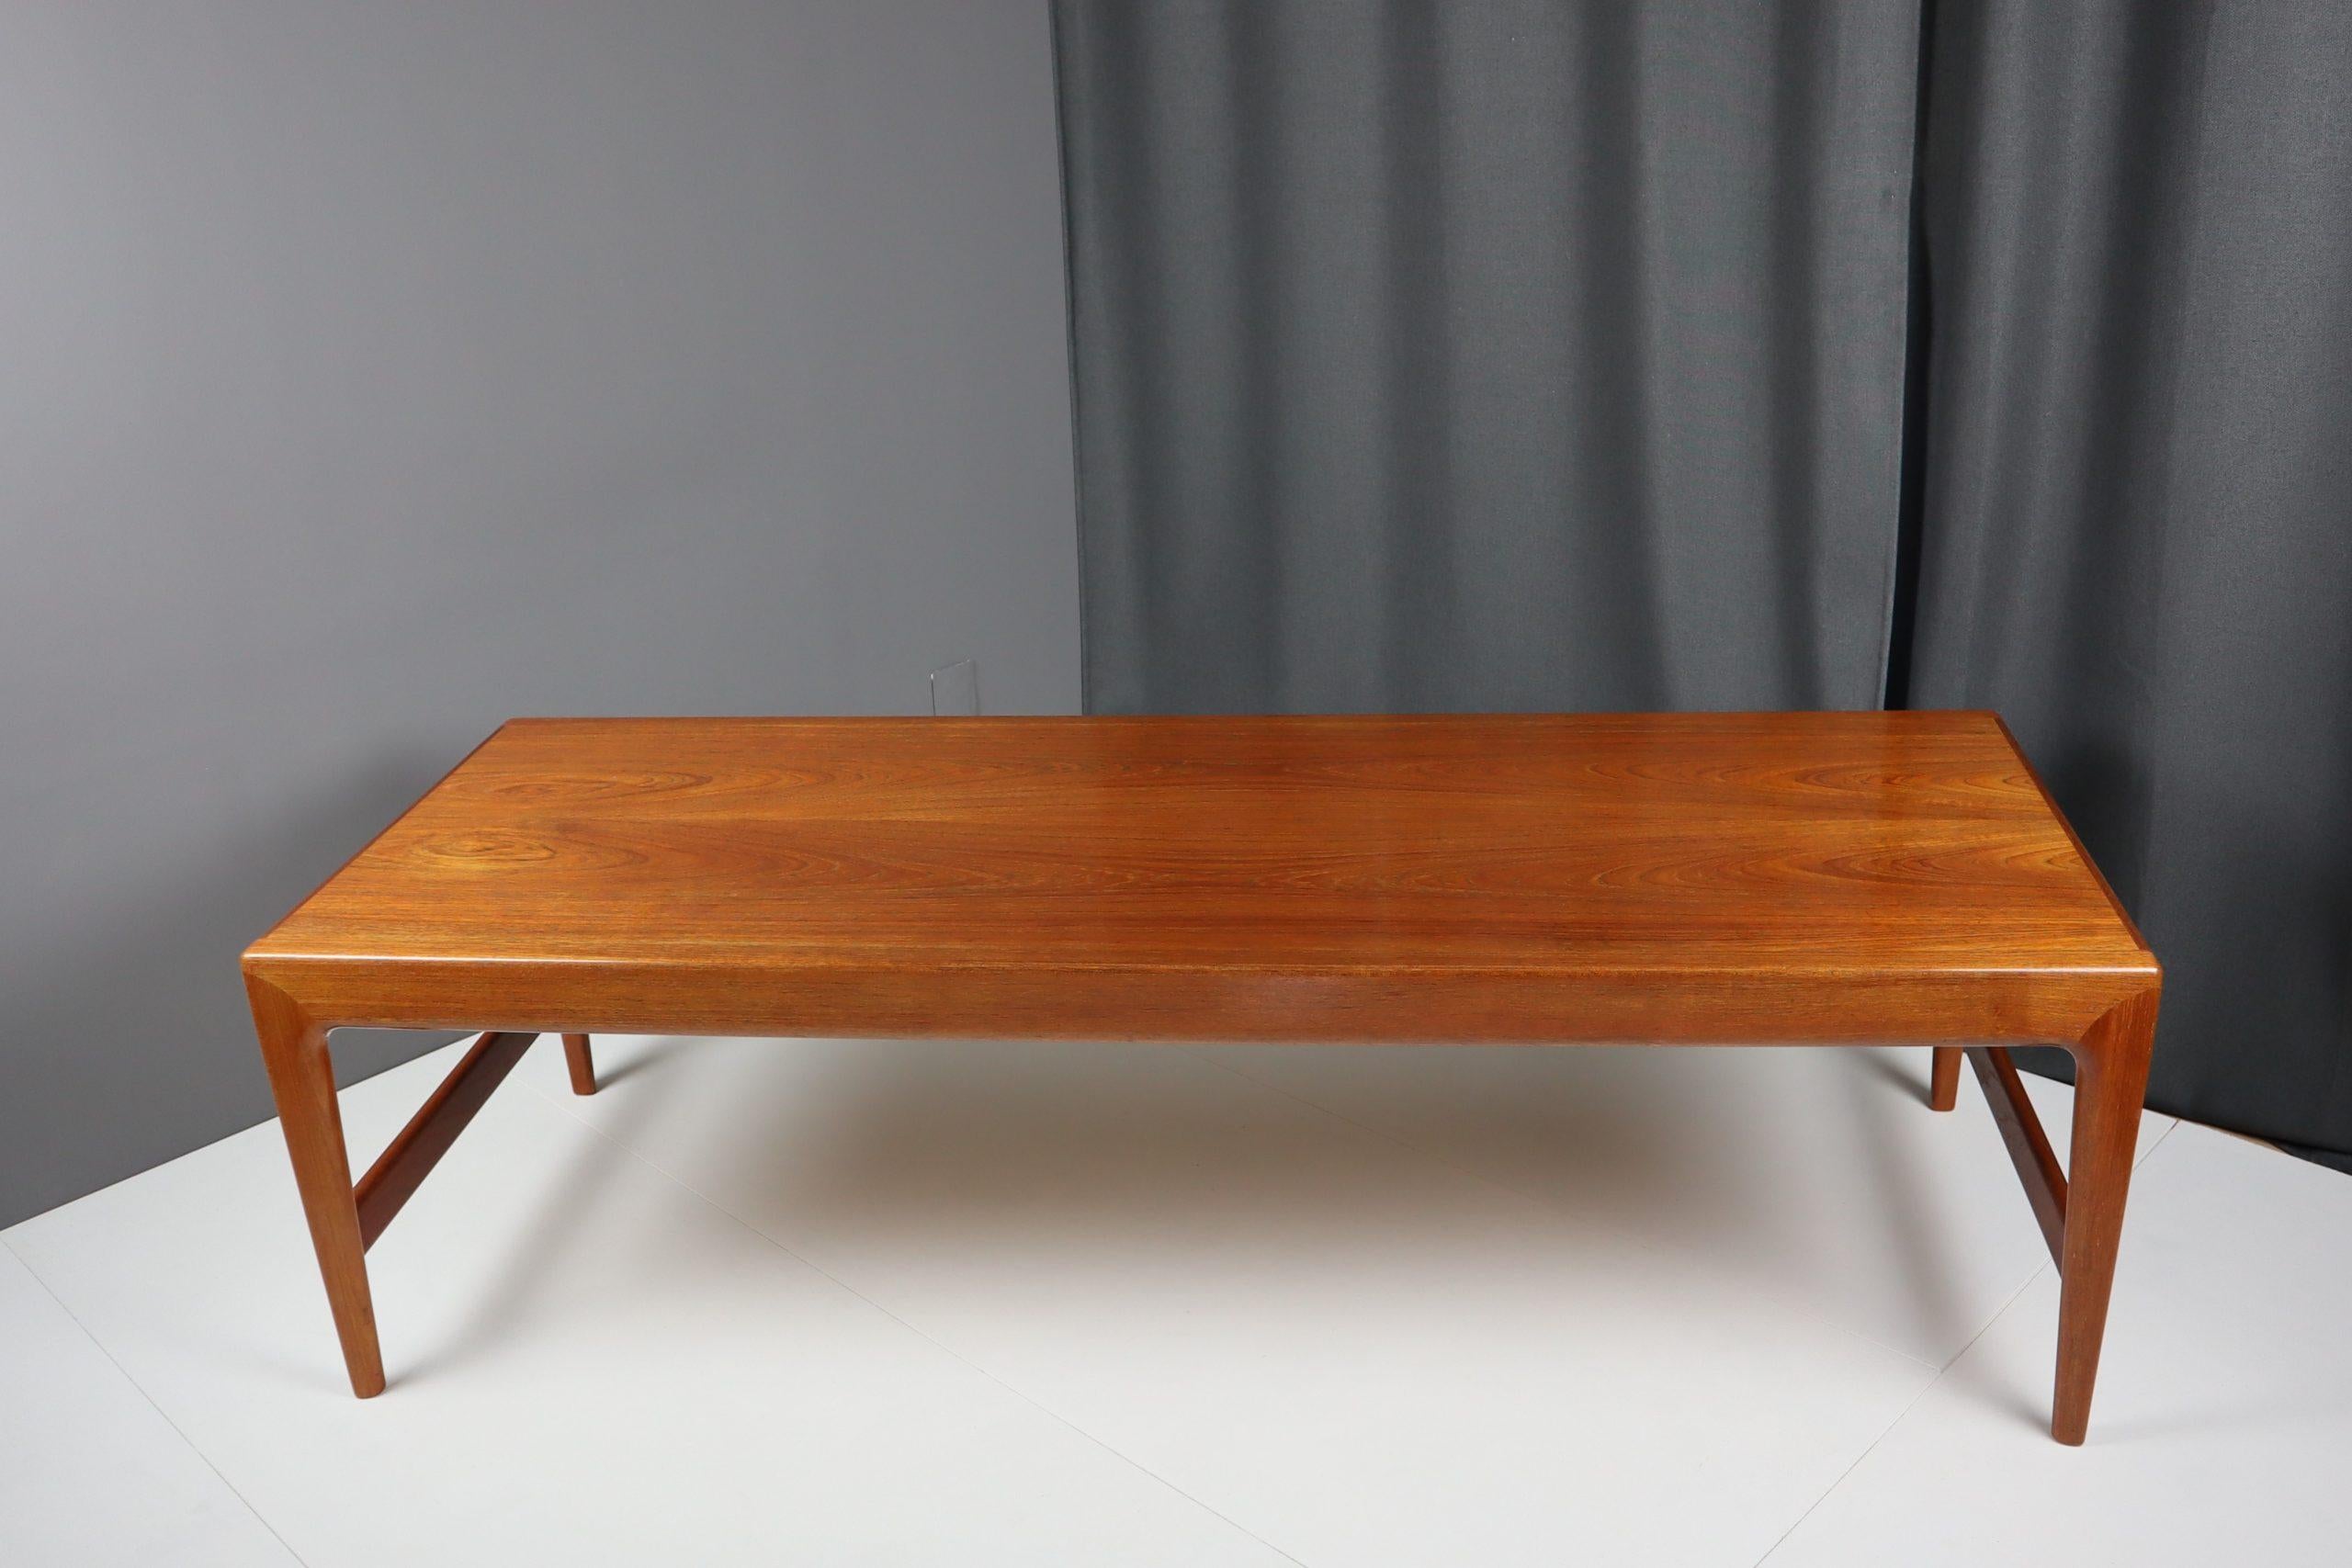 A fantastic large coffee table with two side drawers that run the length of the table. 

We bought this table at an auction in Germany in the summer of 2021. We fell in love with its size, its simple shape and the fantastic drawers. One drawer even